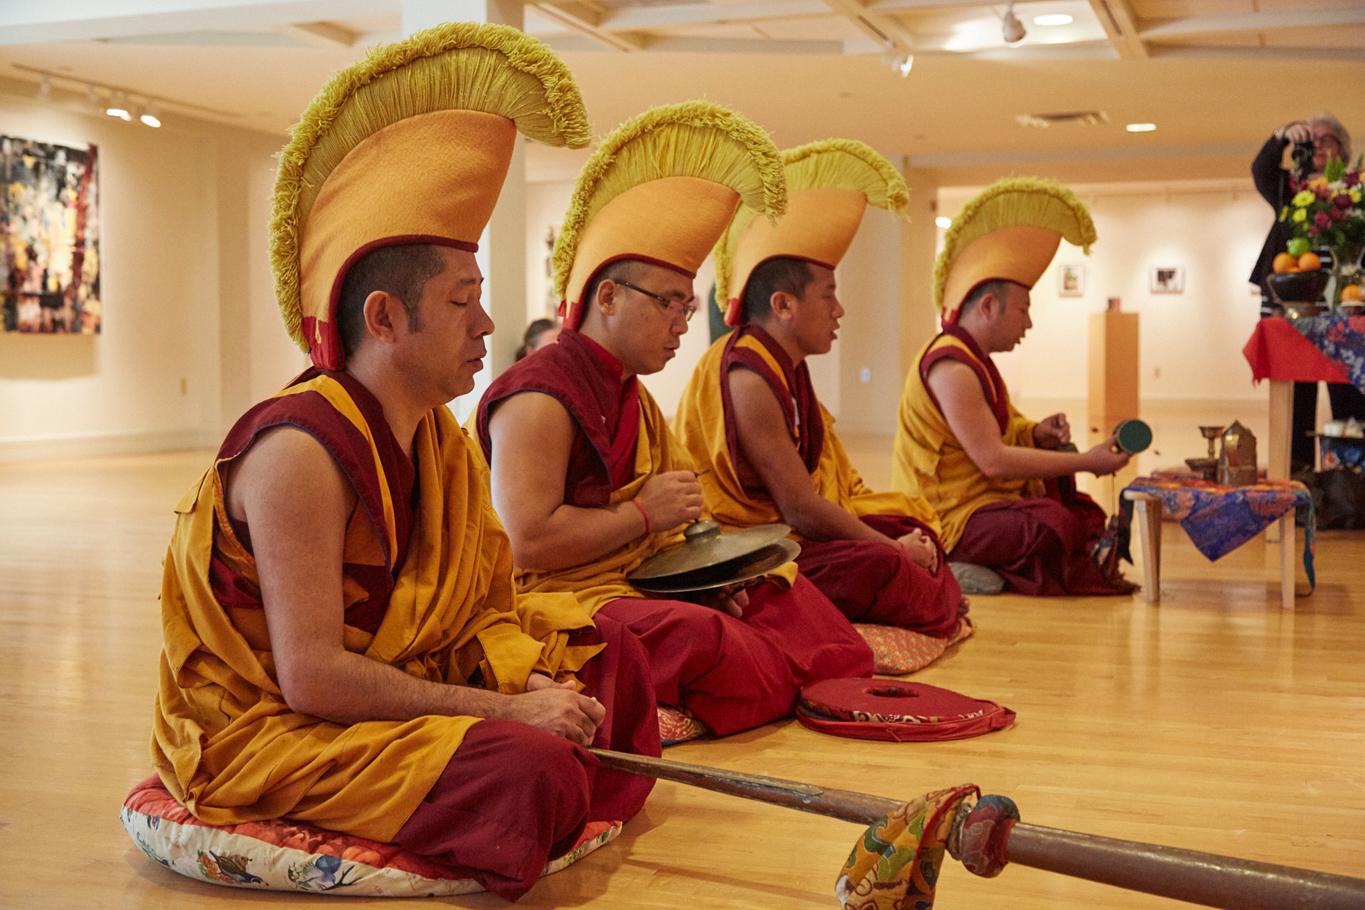 Tibetan Monks. Photo by Julian Restrepo for the City of Coral Springs.